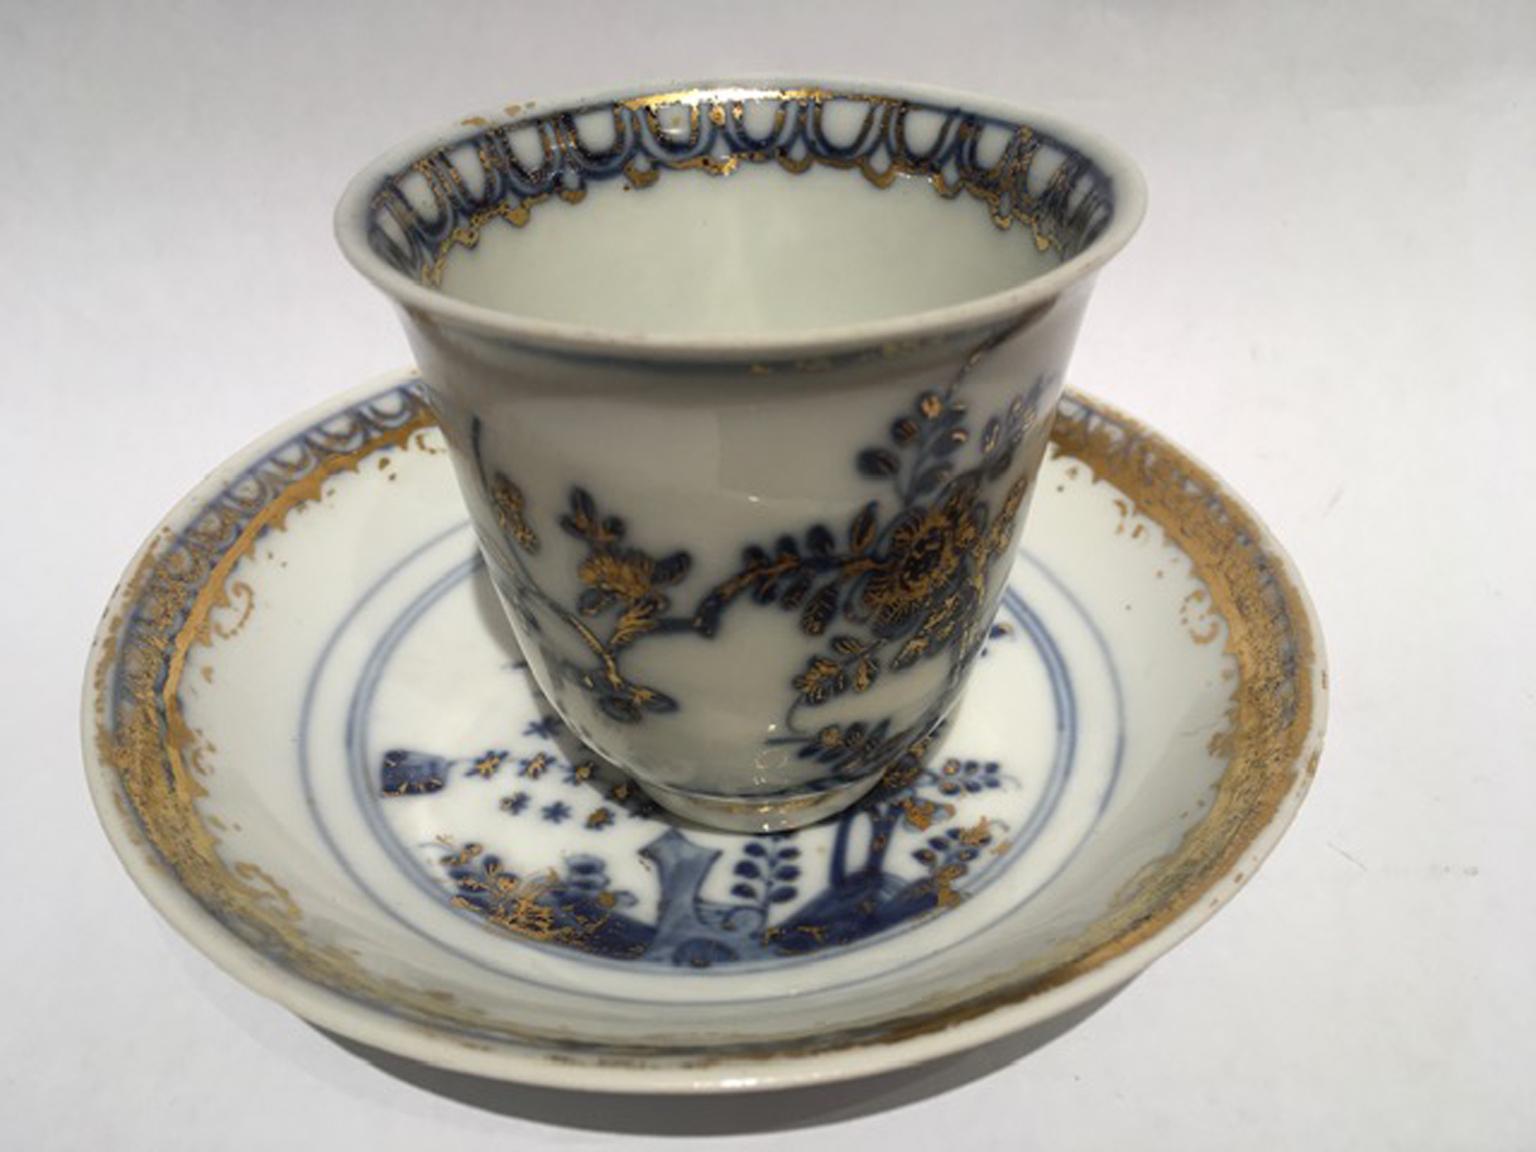 This is a small masterpiece of craftsmanship: The fine porcelain is designed with floral and natural scenes, rich in detail.
A piece for refined collectors or useful to start a collection

Marked on the back.
With certificate of